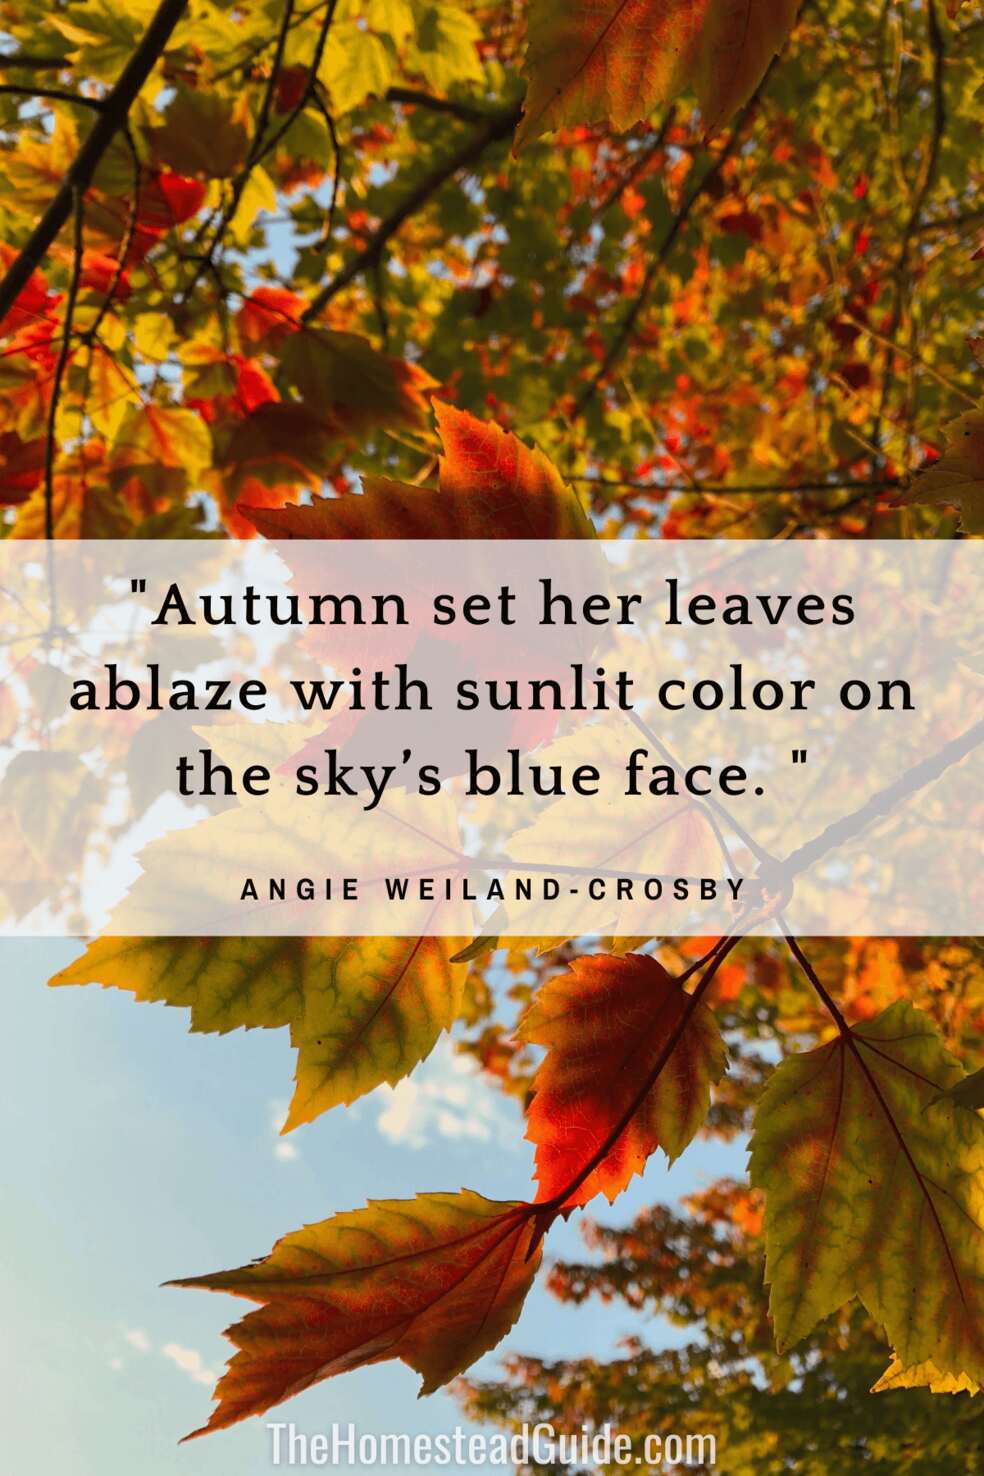 Autumn set her leaves ablaze with sunlit color on the skys blue face. 